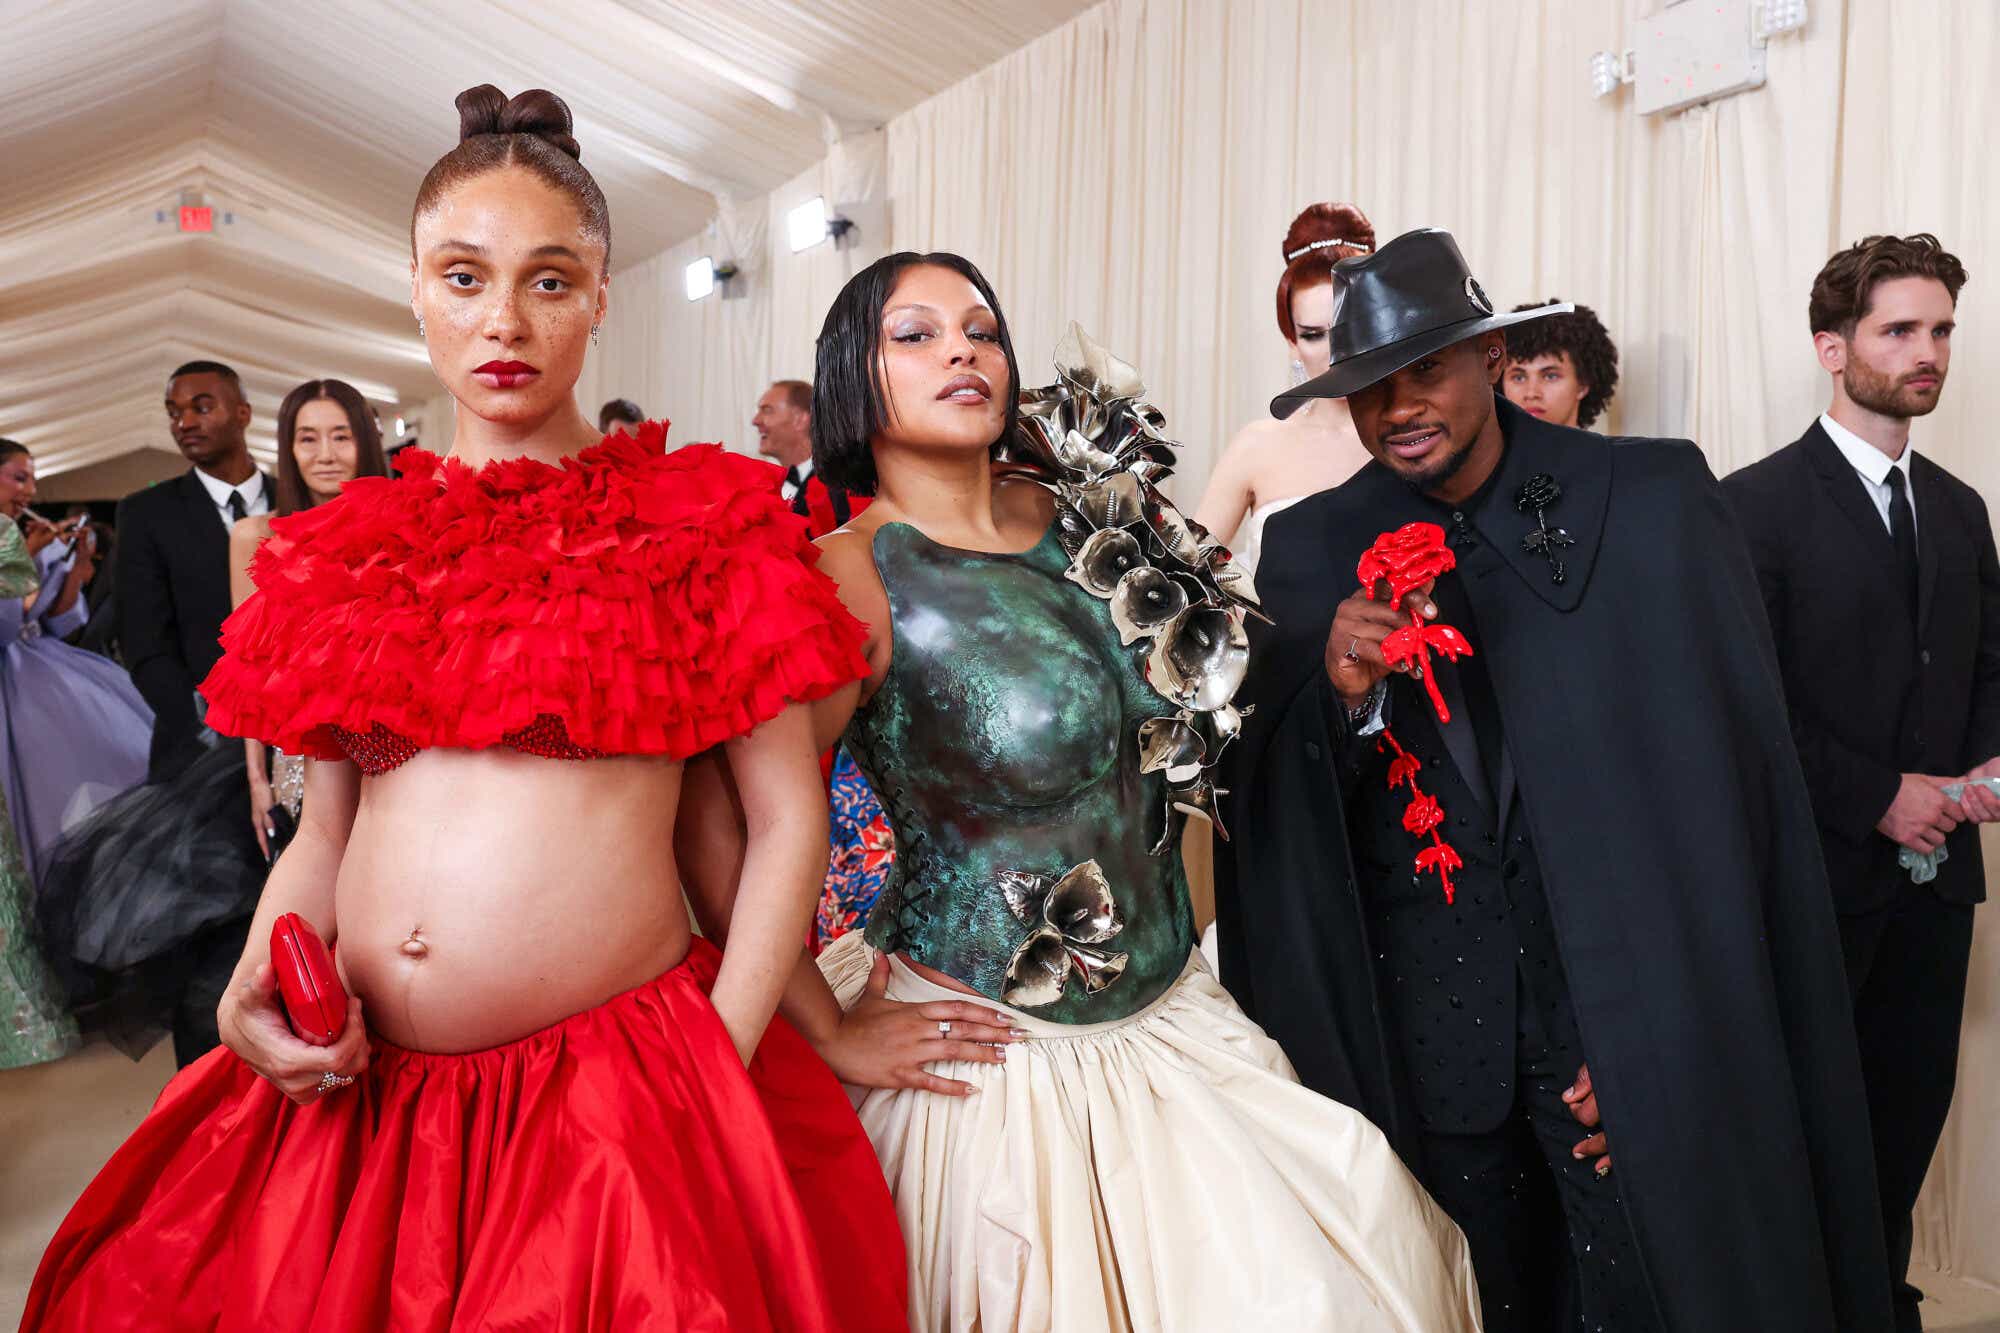 Adwoa Aboah wears a red ruffled collar over her shoulders revealing a diamante red bra underneath, with a bare belly and a wide red skirt. Paloma Elsesser wears a hard mottled green bodice adorned with large 3D metallic tulips and a wide cream skirt, and Usher wears a midnight blue suit with a cape, highwayman-cum-cowboy-style dark hat, and carries a plastic red rose.
